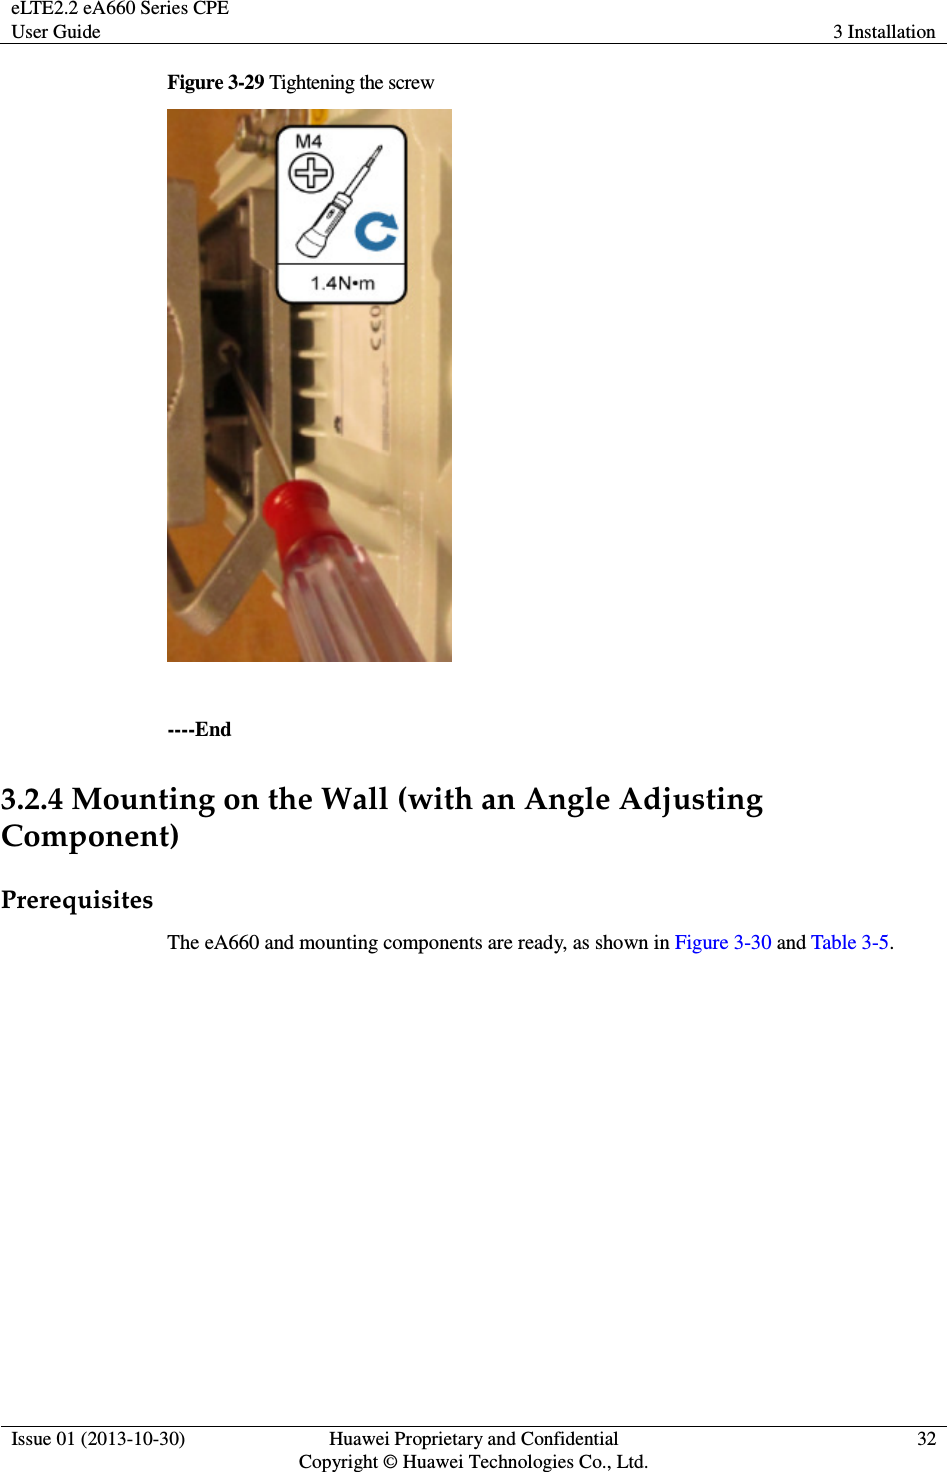 eLTE2.2 eA660 Series CPE User Guide  3 Installation  Issue 01 (2013-10-30)  Huawei Proprietary and Confidential                                     Copyright © Huawei Technologies Co., Ltd. 32  Figure 3-29 Tightening the screw   ----End 3.2.4 Mounting on the Wall (with an Angle Adjusting Component) Prerequisites The eA660 and mounting components are ready, as shown in Figure 3-30 and Table 3-5. 